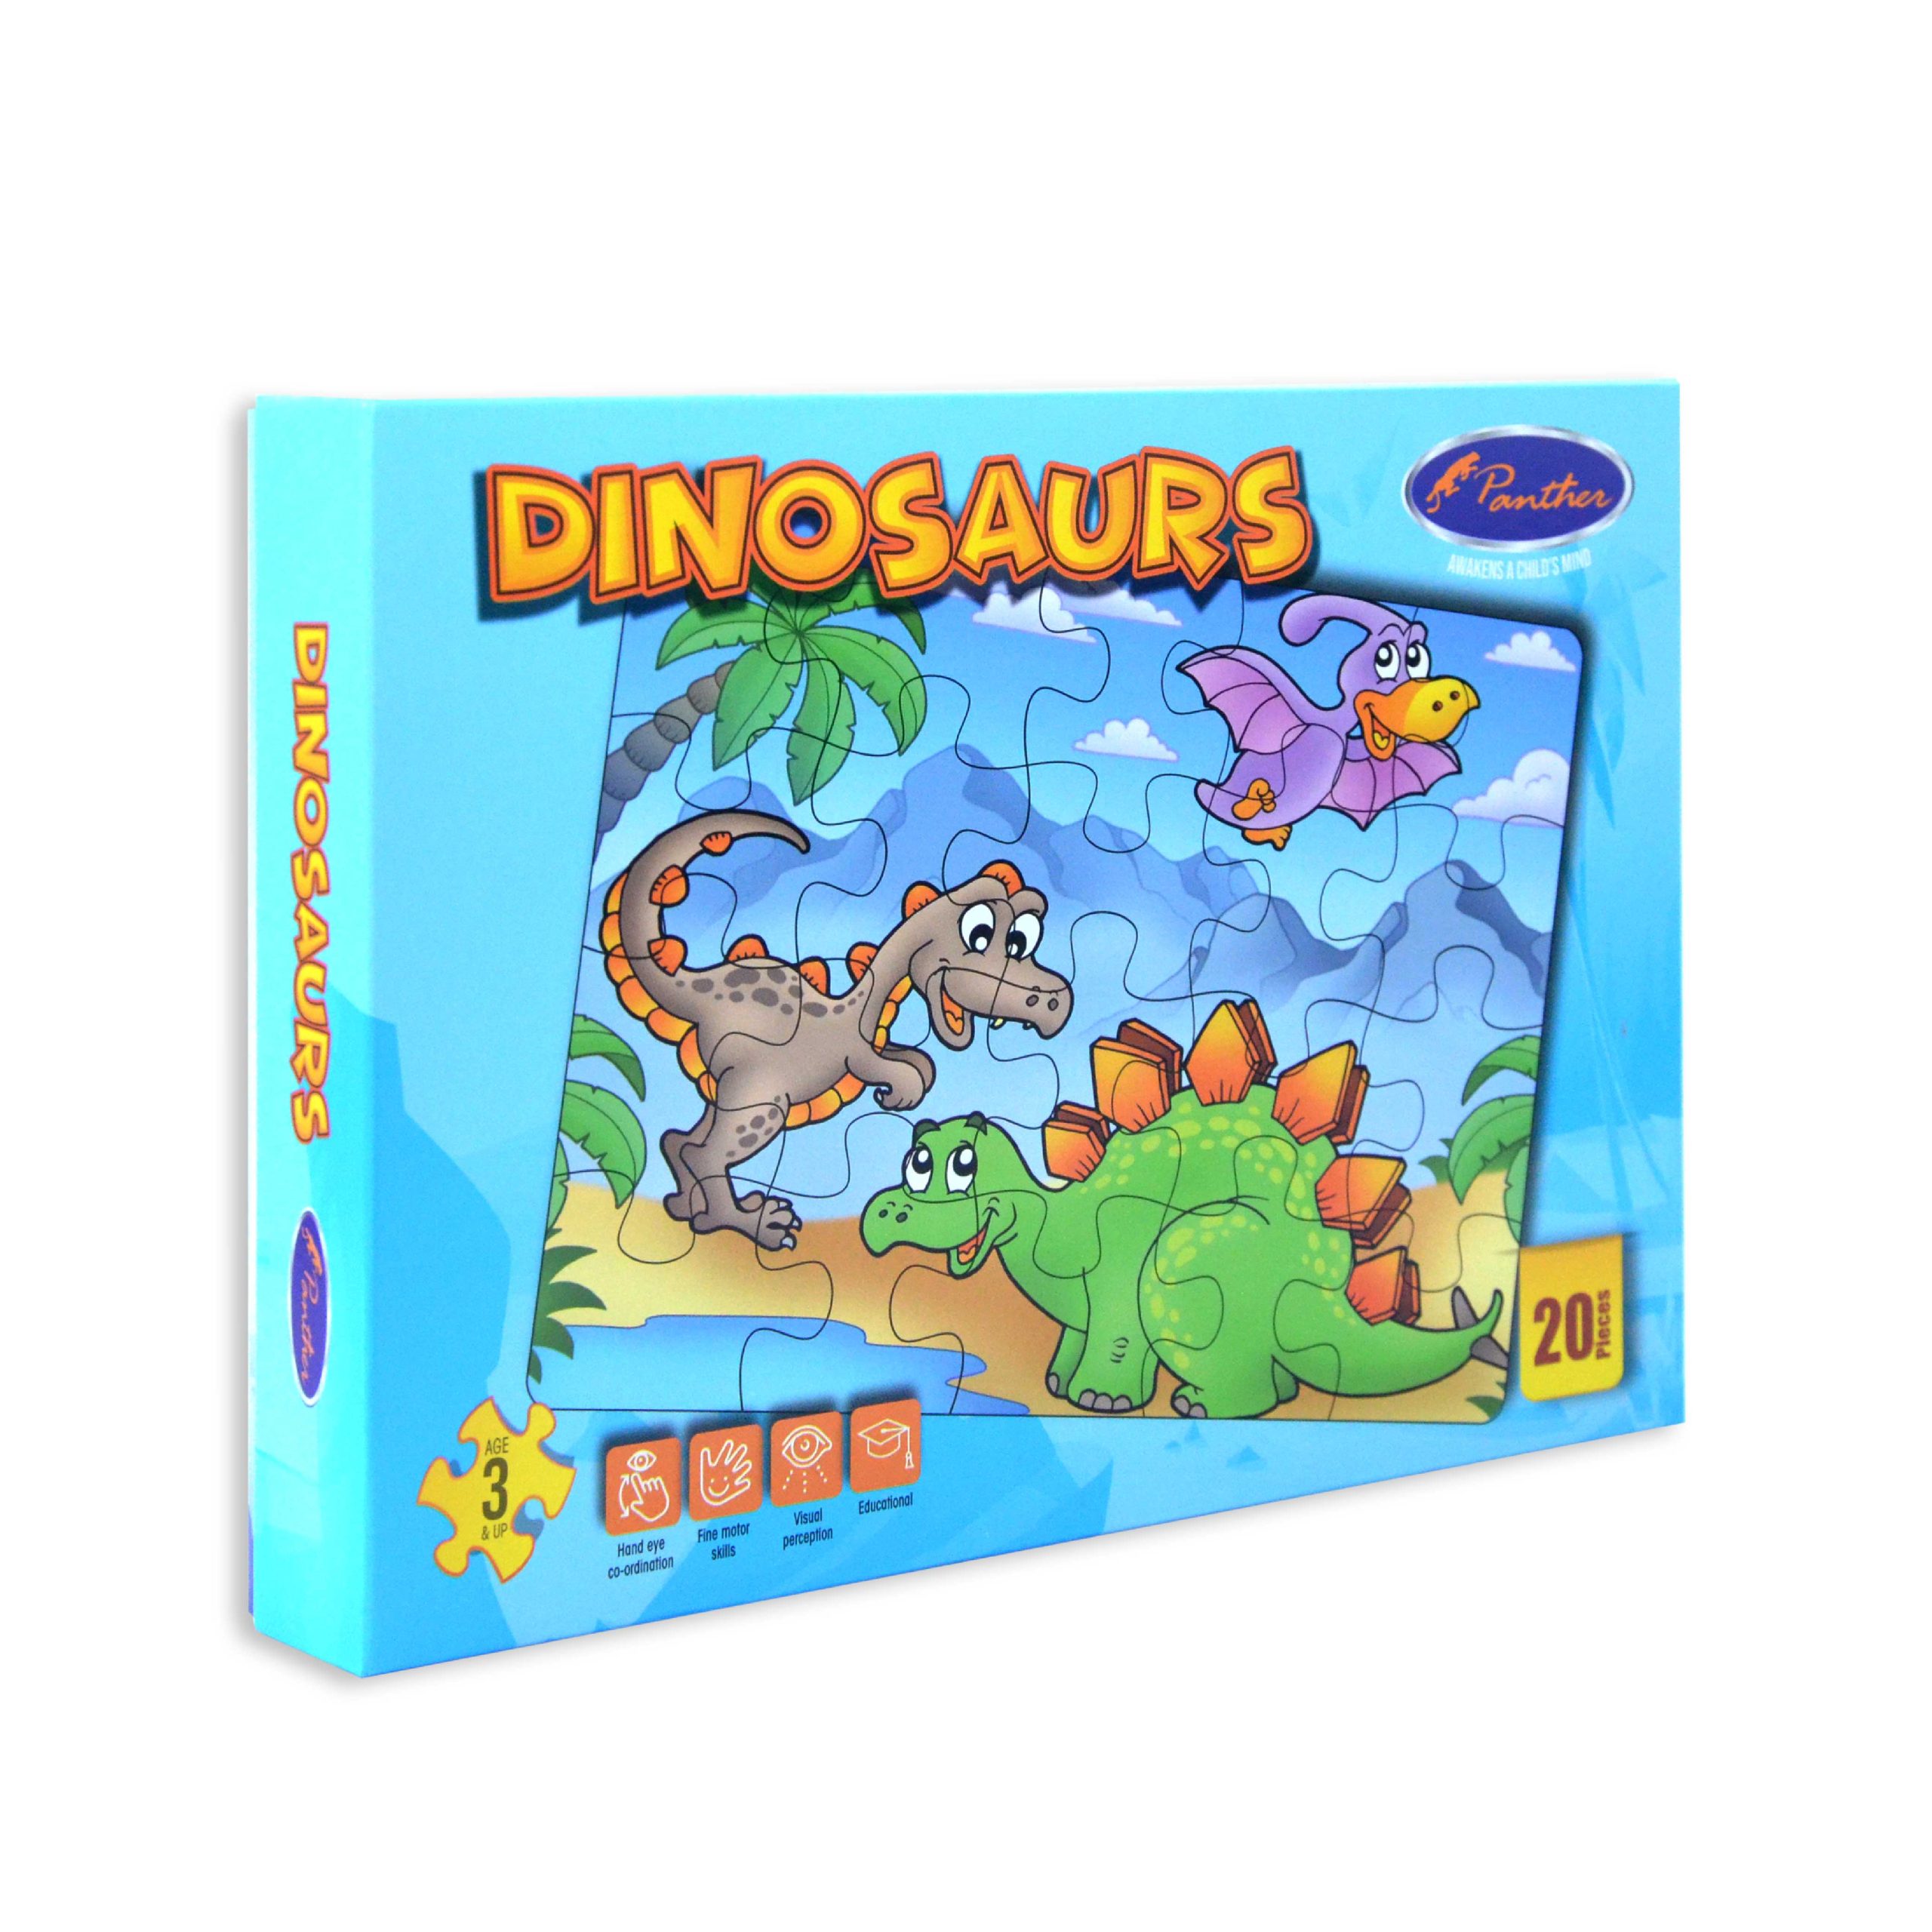 TY5197 DINOSAURS PUZZLE 01 scaled